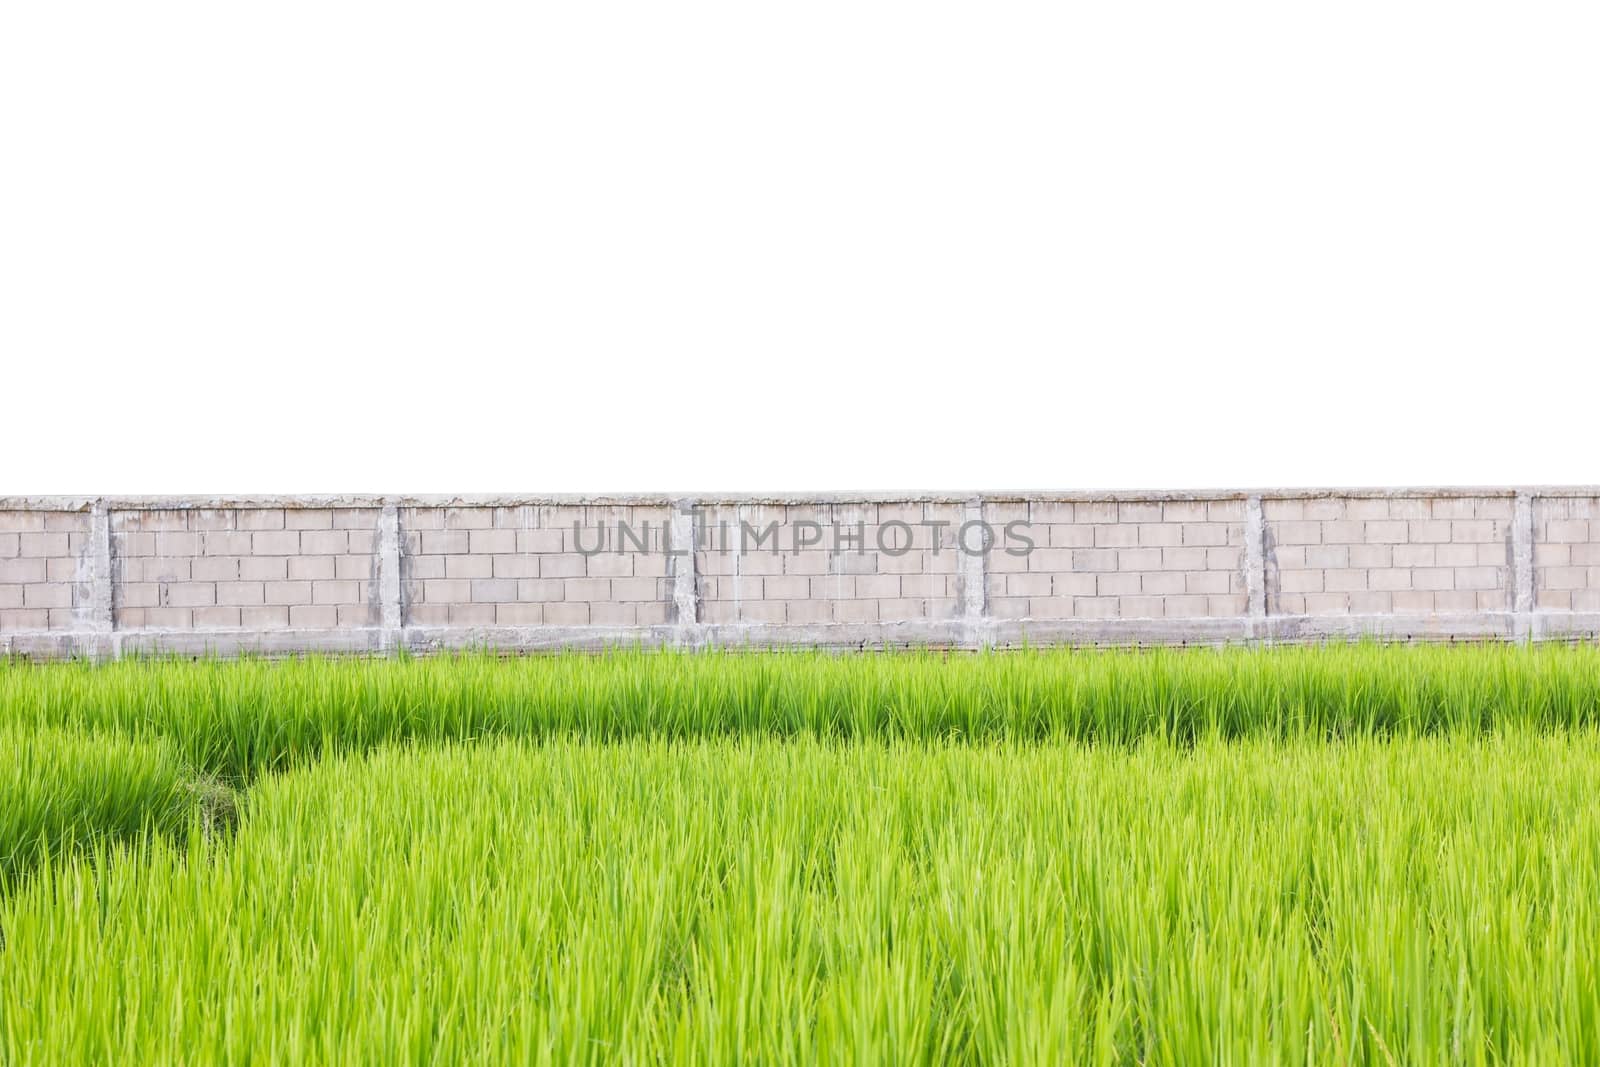 Green rice plants in front of wall  isolated on white background by a3701027